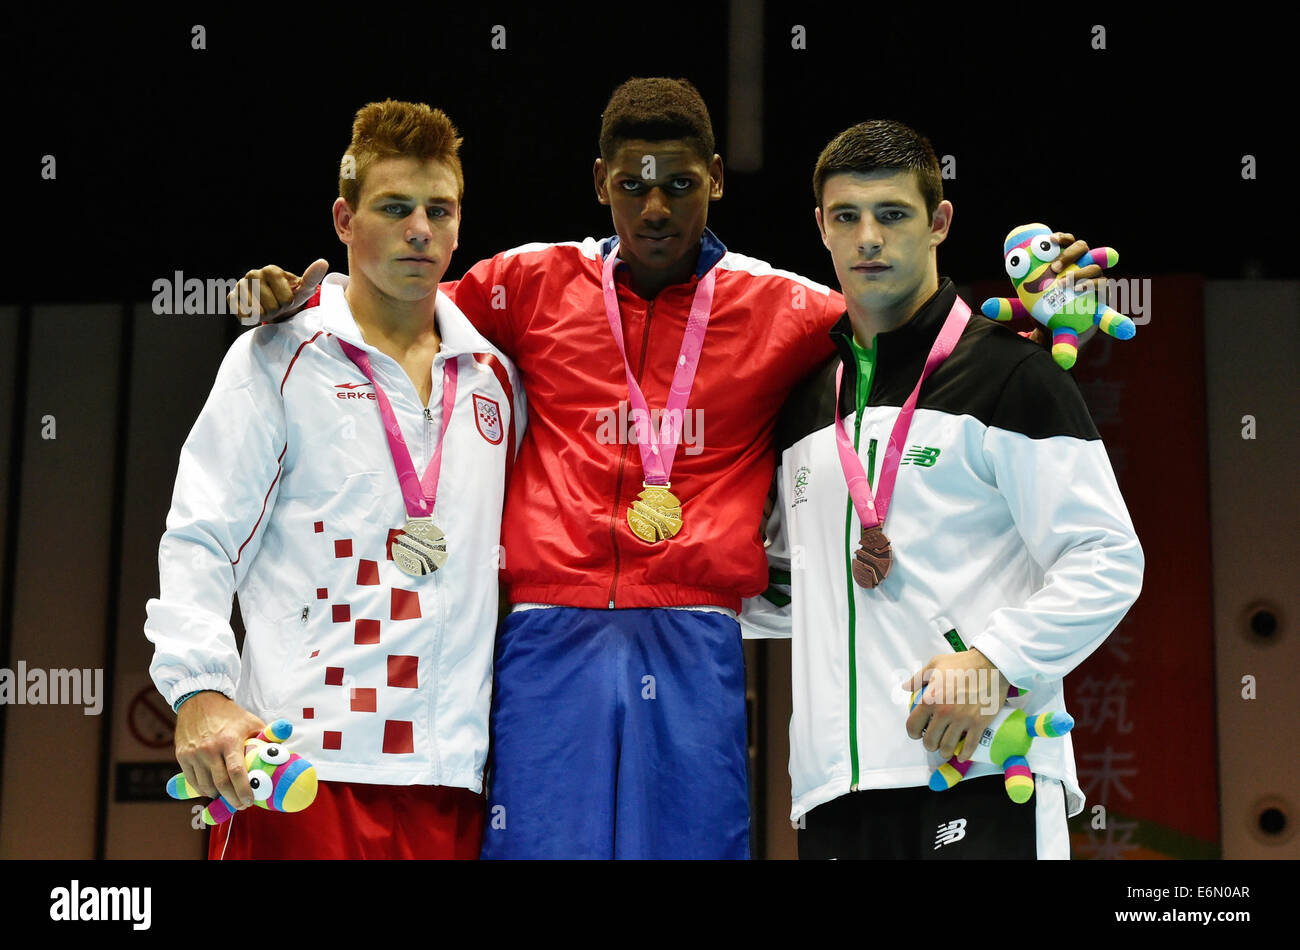 Nanjing, China's Jiangsu Province. 27th Aug, 2014. Gold medalist Alain Hernandez Morejon Yordan of Cuba, silver medalist Toni Filipi of Croatia and bronze medalist Michael Gallagher of Ireland pose for photo during the awarding ceremony of men's heavy (91kg) final bout of boxing at the Nanjing 2014 Youth Olympic Games in Nanjing, east China's Jiangsu Province, Aug. 27, 2014. Credit:  Ou Dongqu/Xinhua/Alamy Live News Stock Photo